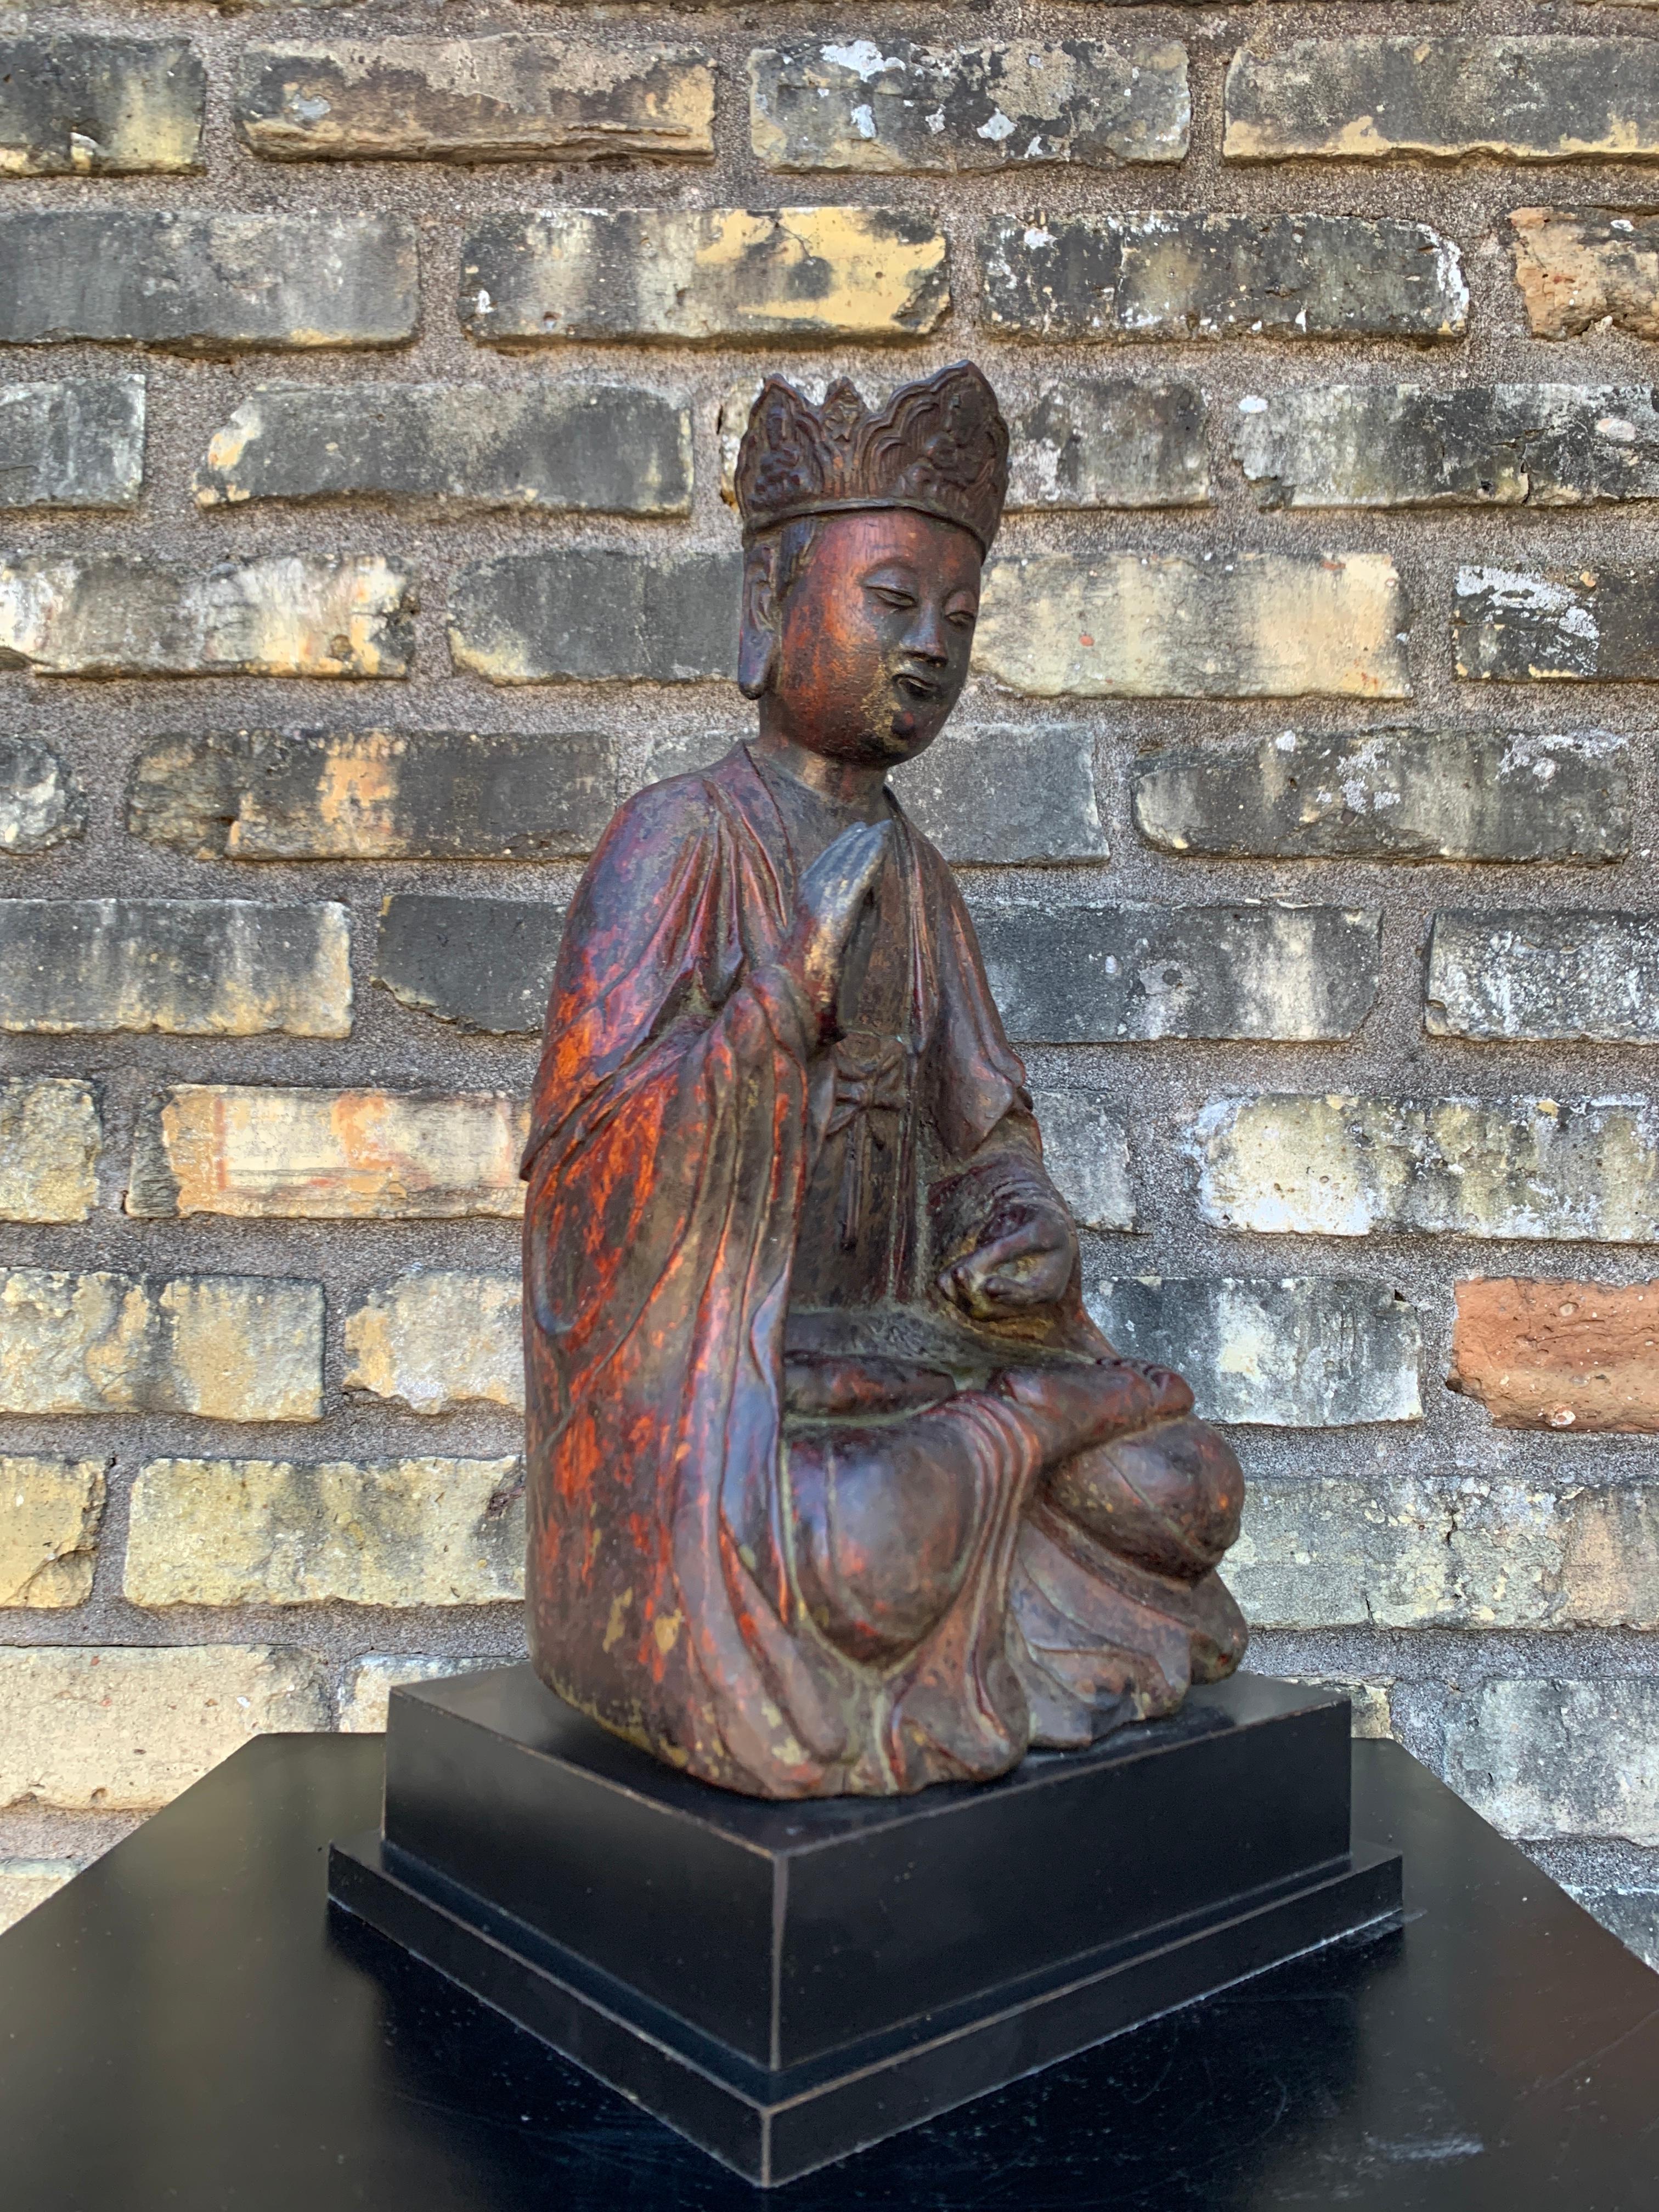 A Chinese early Qing Dynasty carved and lacquered wood figure of Guanyin, Southern China, 17th/18th century.

Guanyin, the Bodhisattva of Compassion and Mercy, is portrayed seated in dhyanasana, one hand raised in viktara mudra, the gesture of